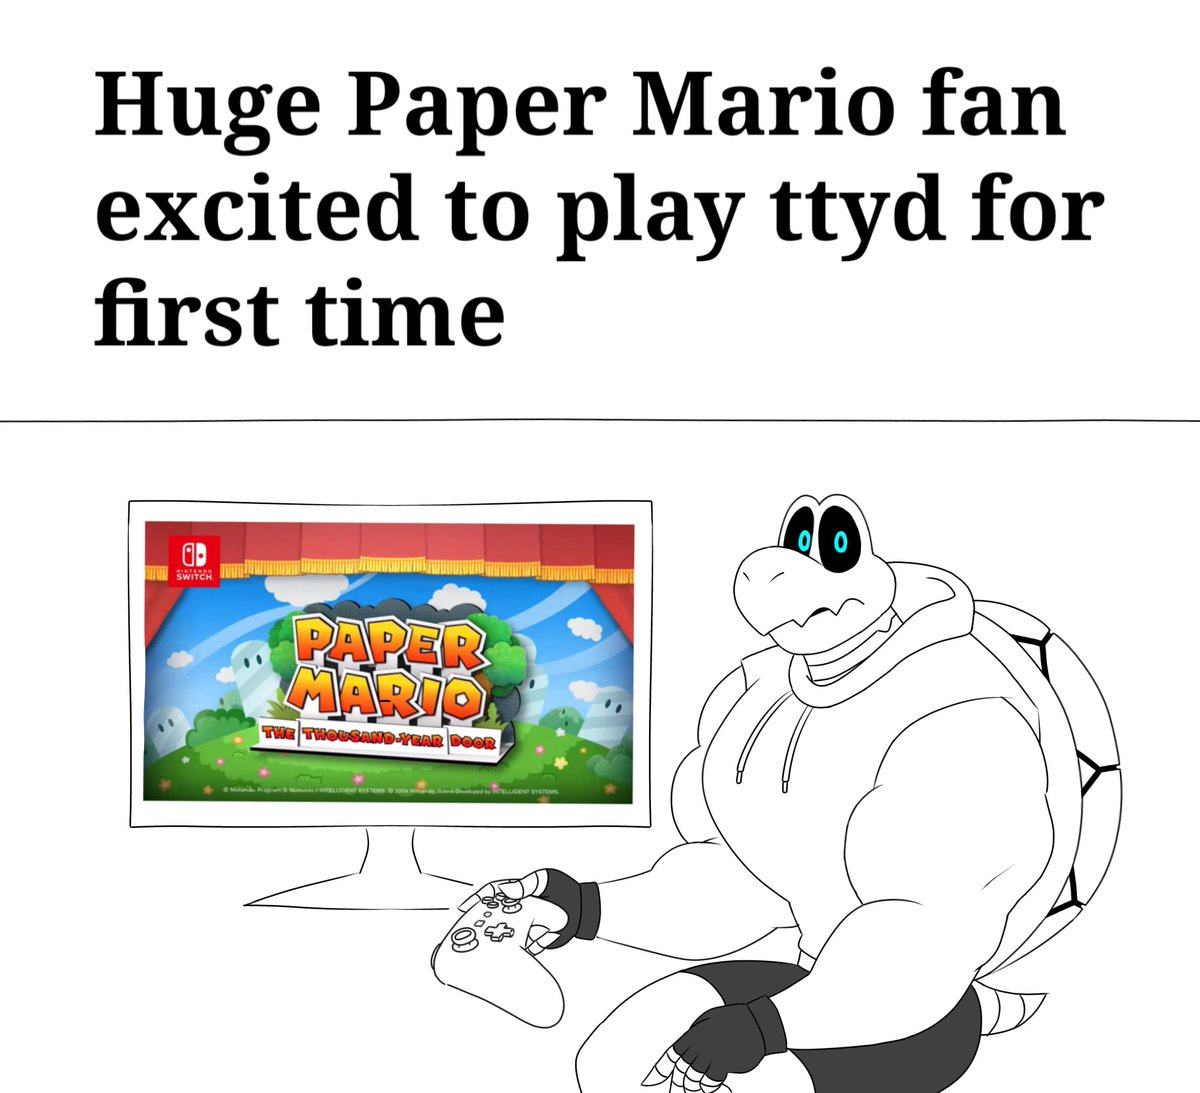 Ttyd around the corner and it's the only paper Mario game I haven't played yet